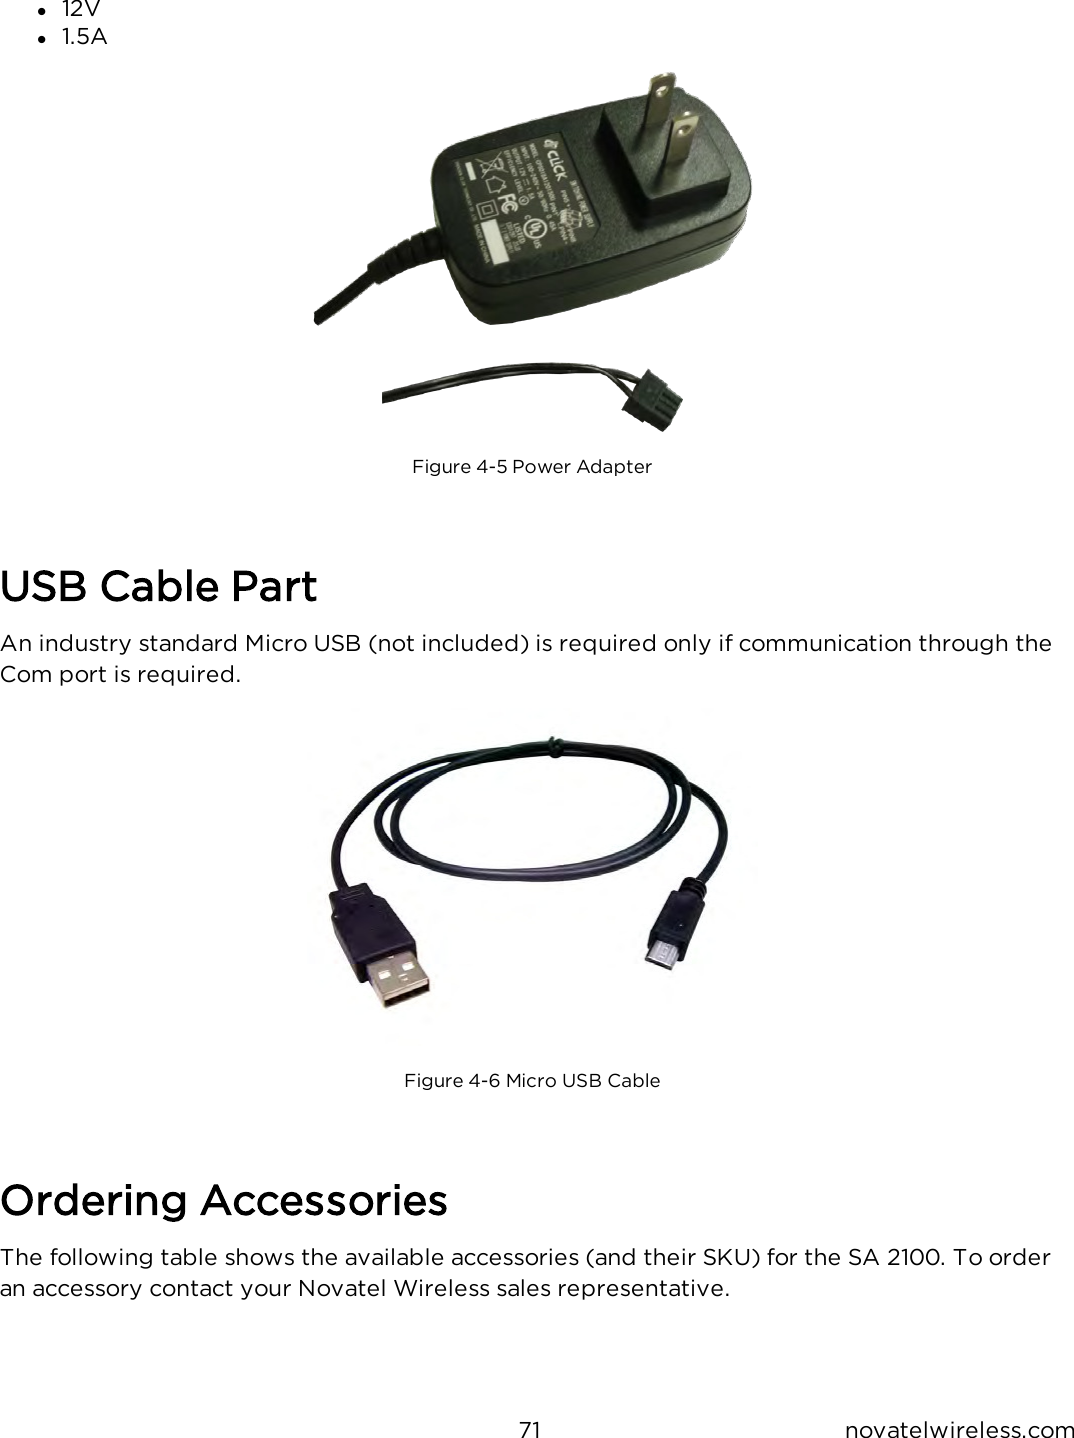 71 novatelwireless.coml12Vl1.5AFigure 4-5 Power AdapterUSB Cable PartAn industry standard Micro USB (not included) is required only if communication through theCom port is required.Figure 4-6 Micro USBCableOrdering AccessoriesThe following table shows the available accessories (and their SKU) for the SA 2100. To orderan accessory contact your Novatel Wireless sales representative.